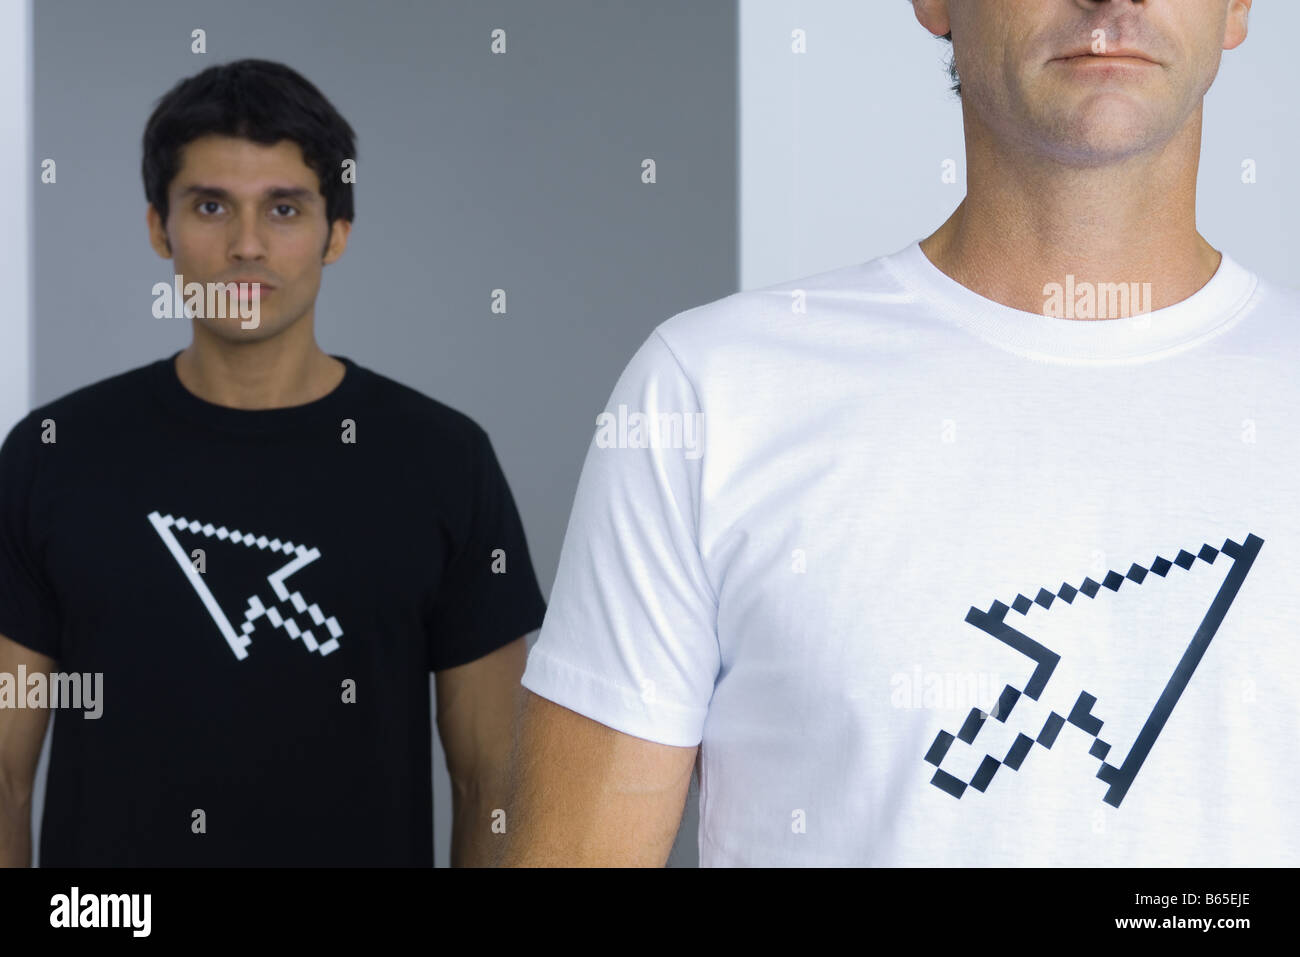 Men wearing tee-shirts printed with computer cursors, cropped Stock Photo